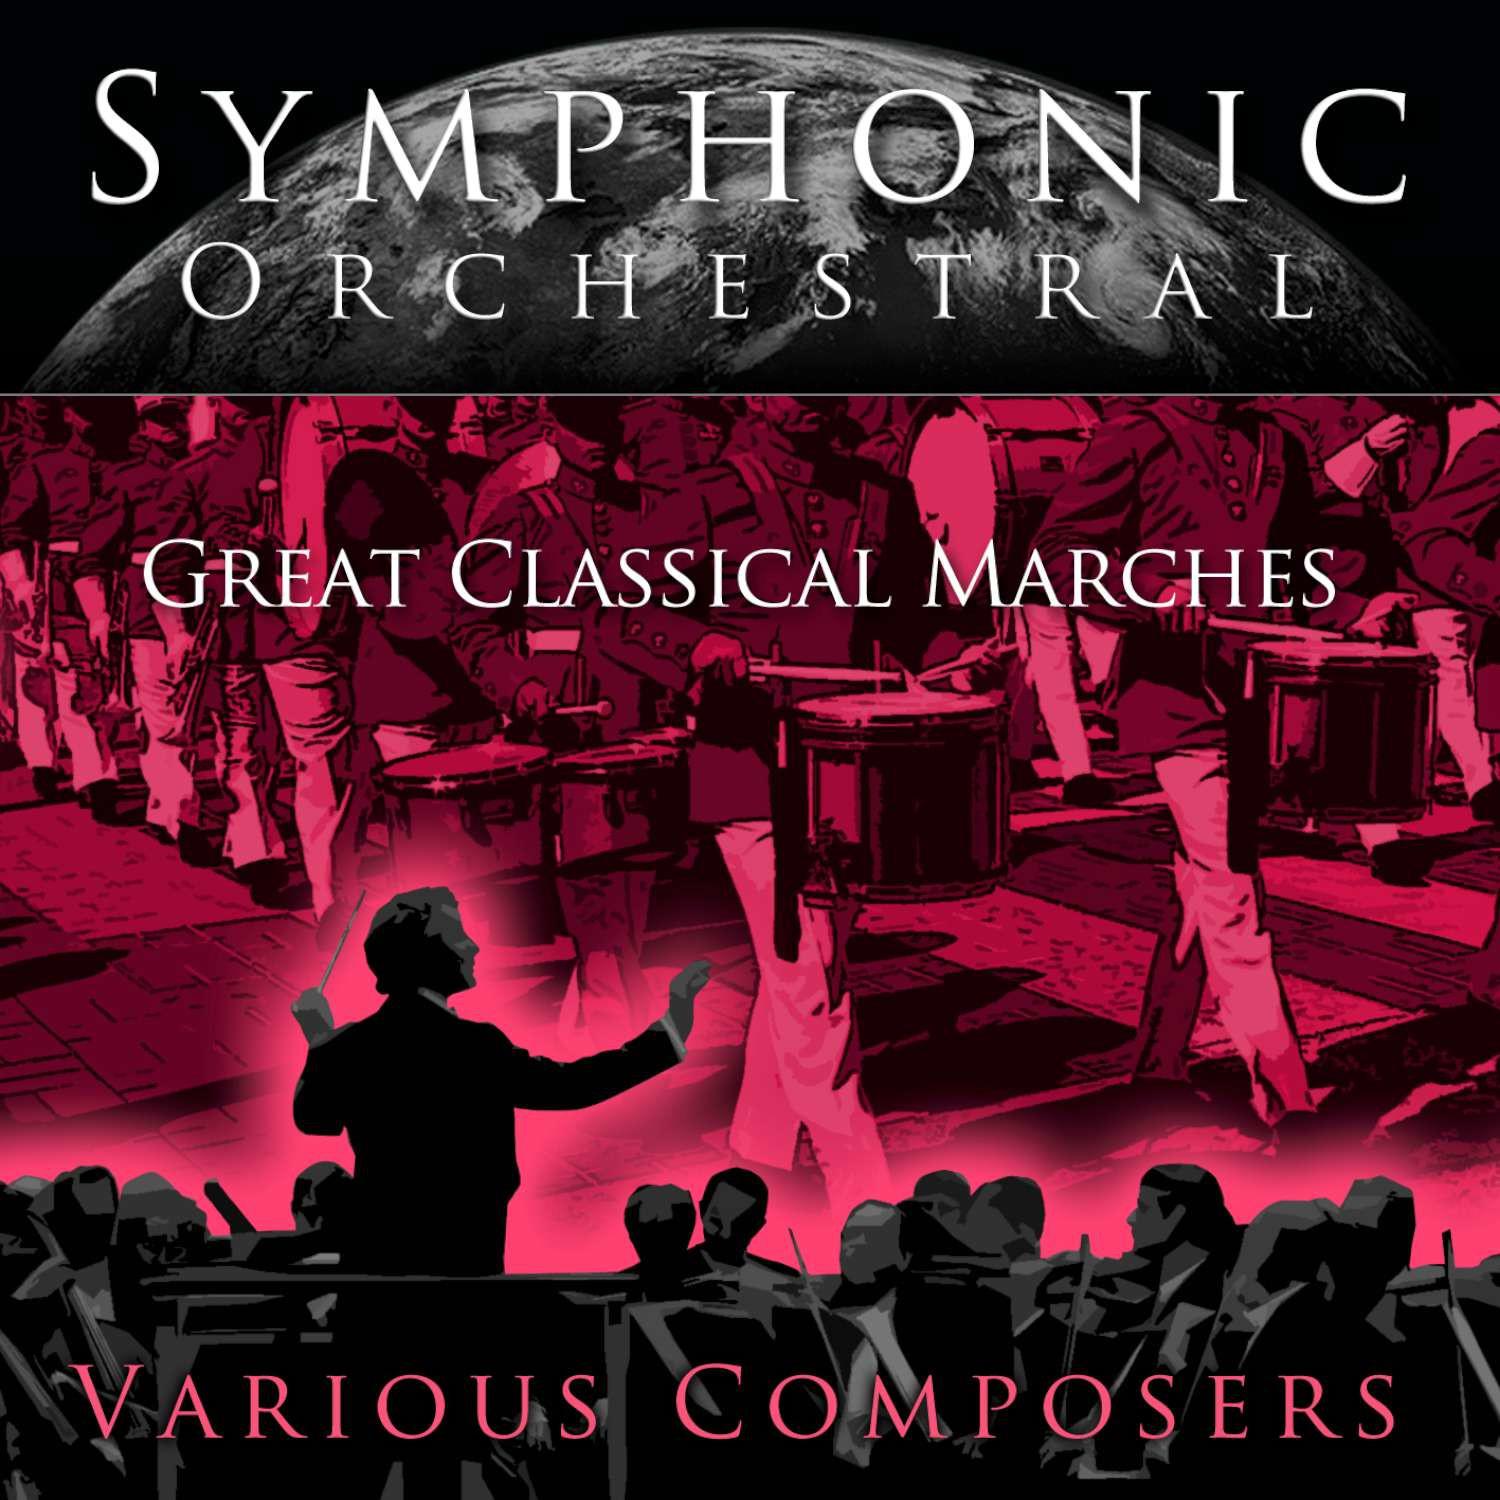 Symphonic Orchestral - Great Classical Marches